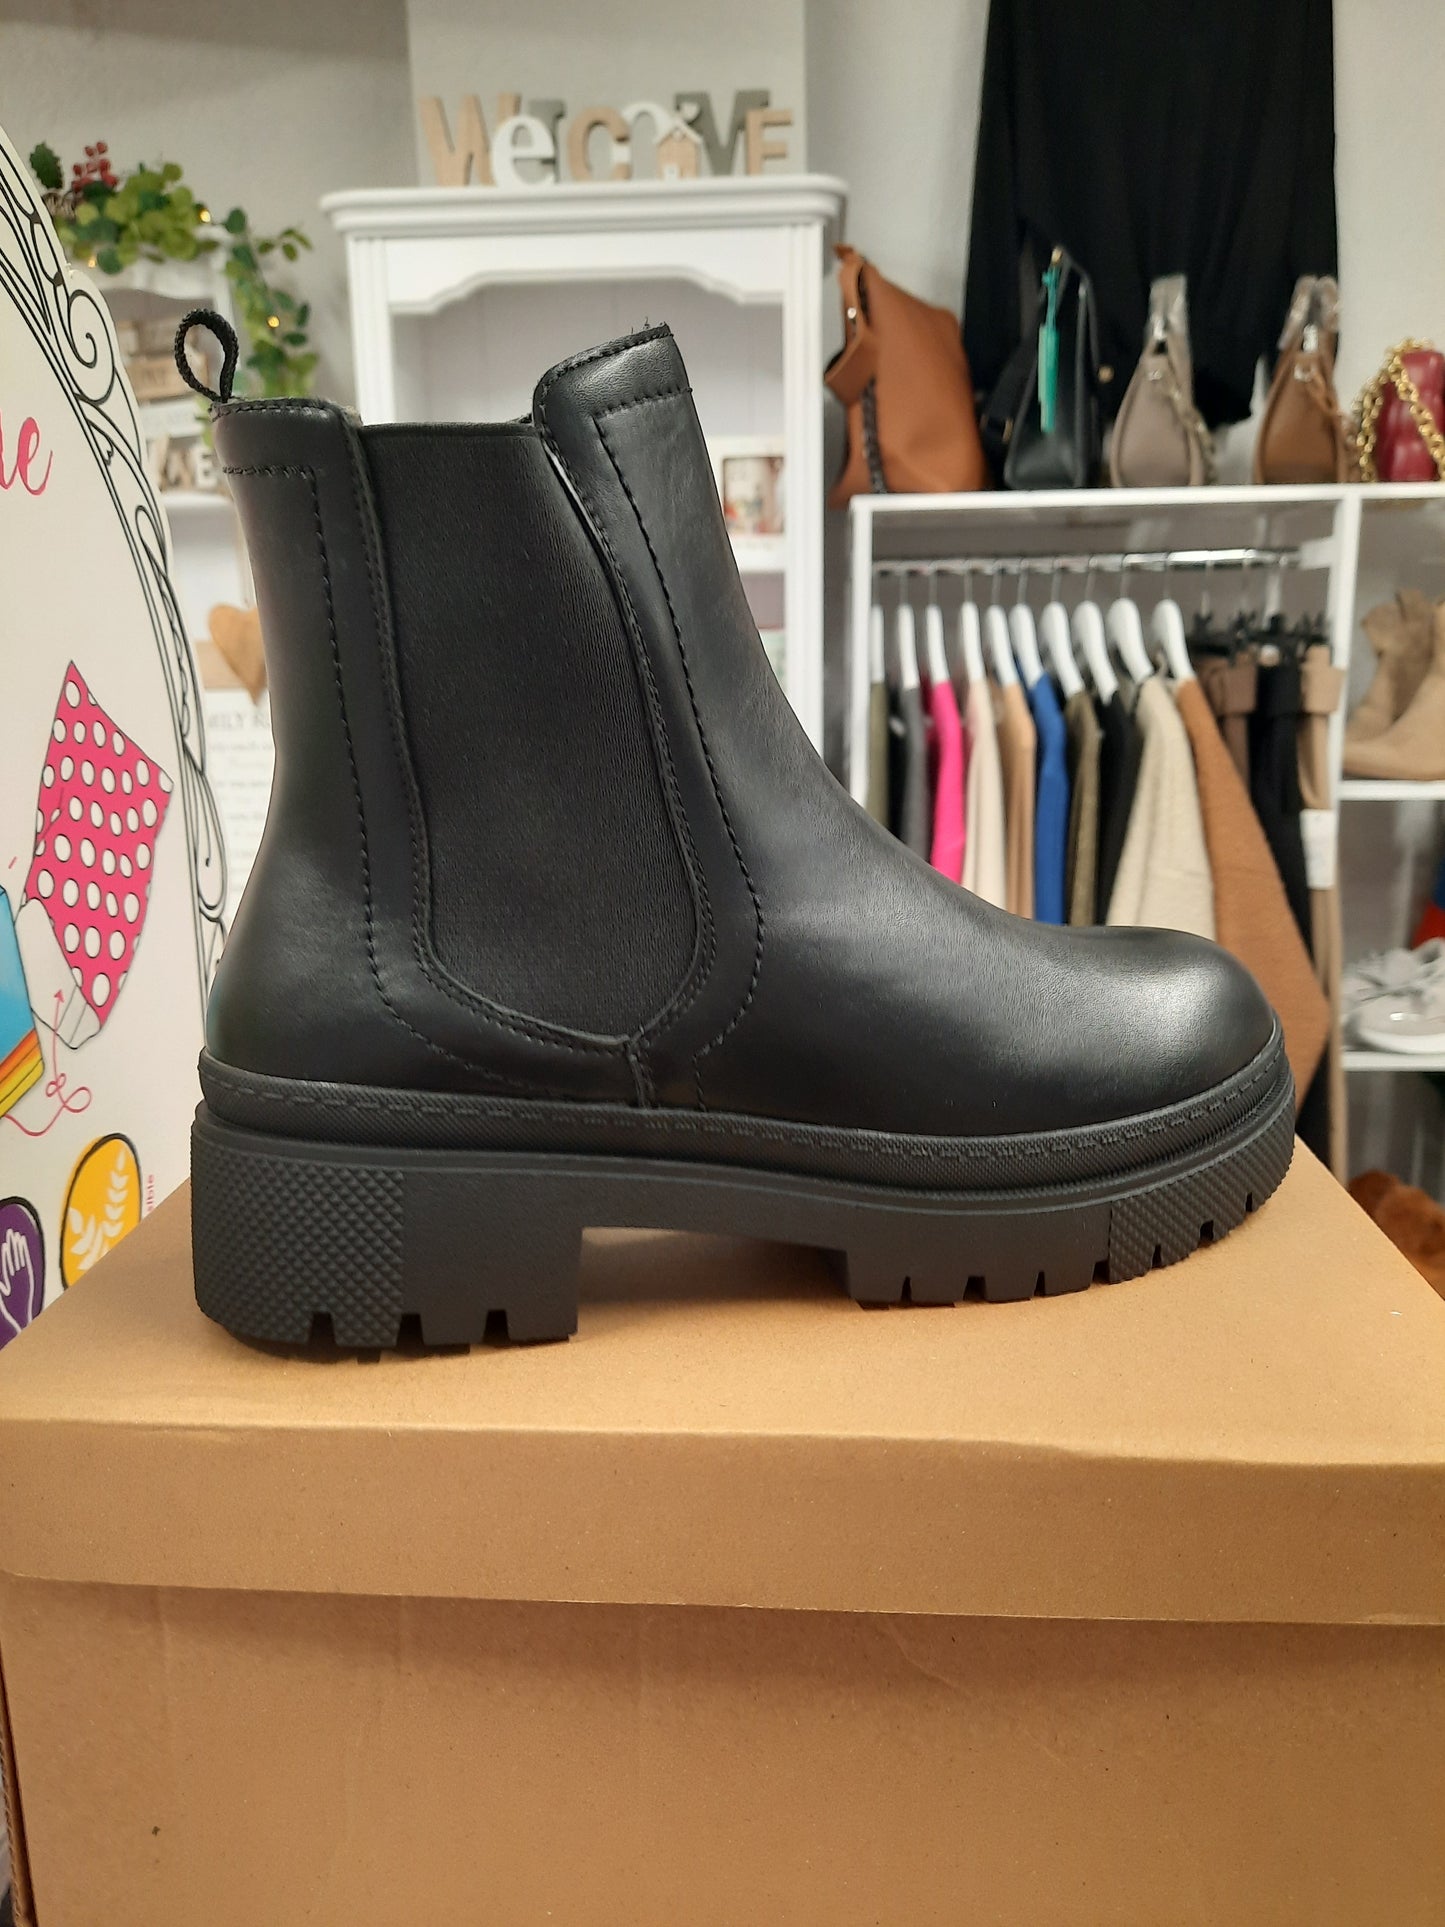 Ankle Boots Black side Zip.